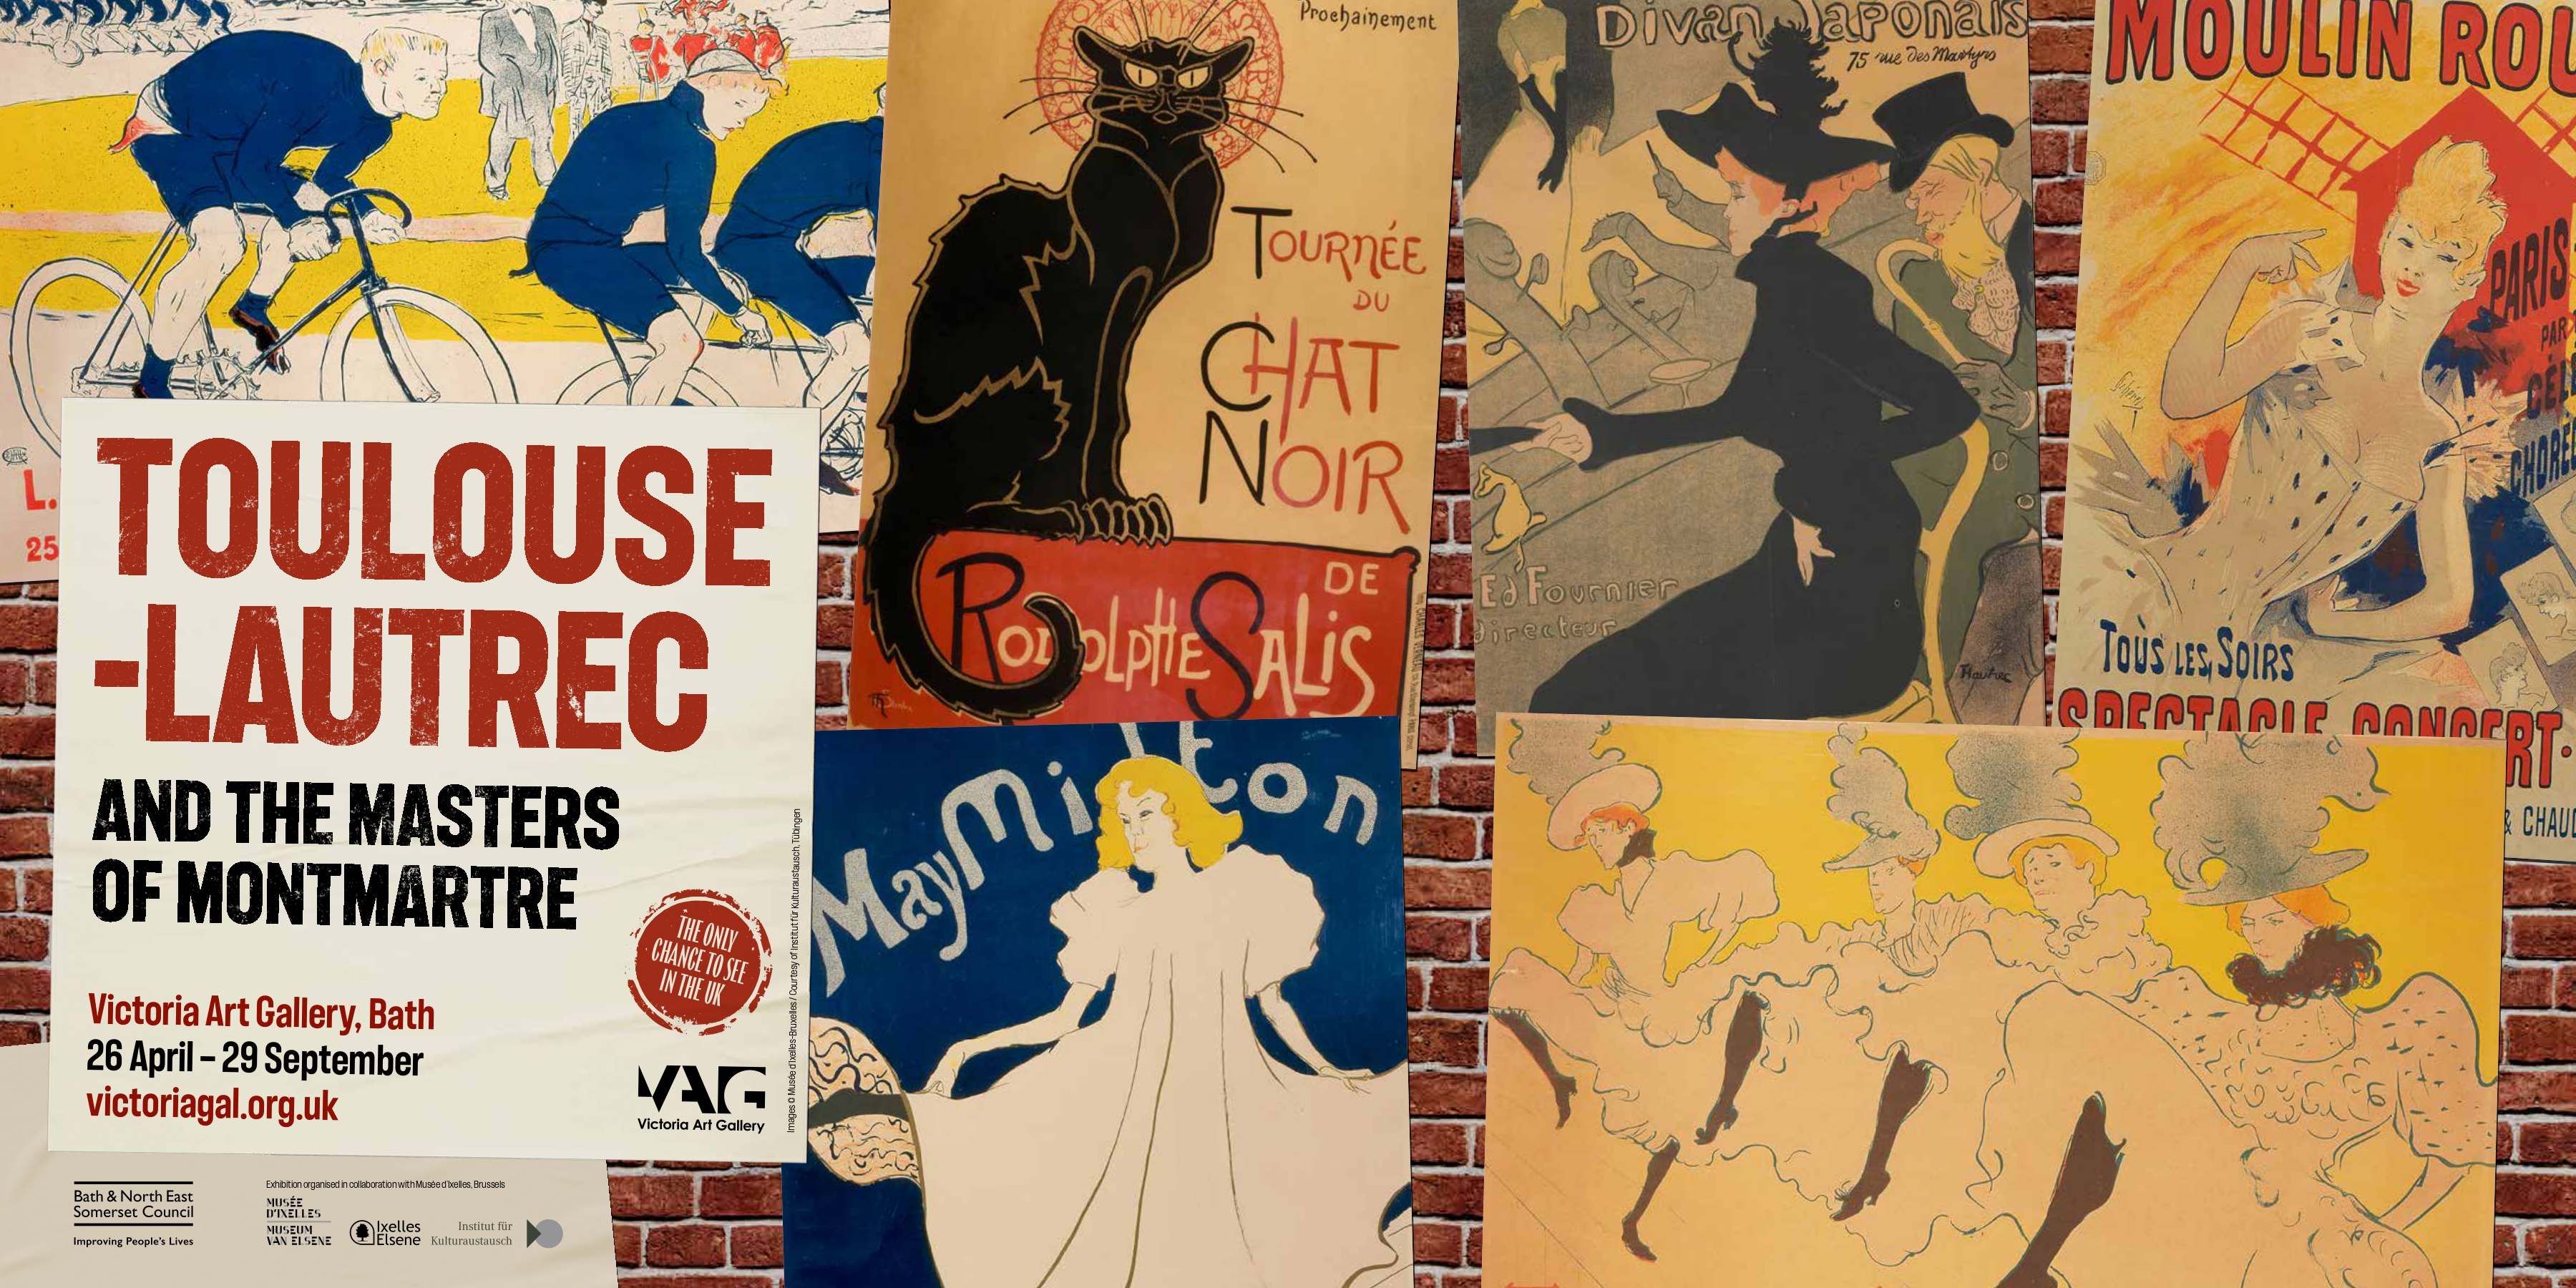 artwork for Toulouse Lautrec showing a brick wall decorated with posters